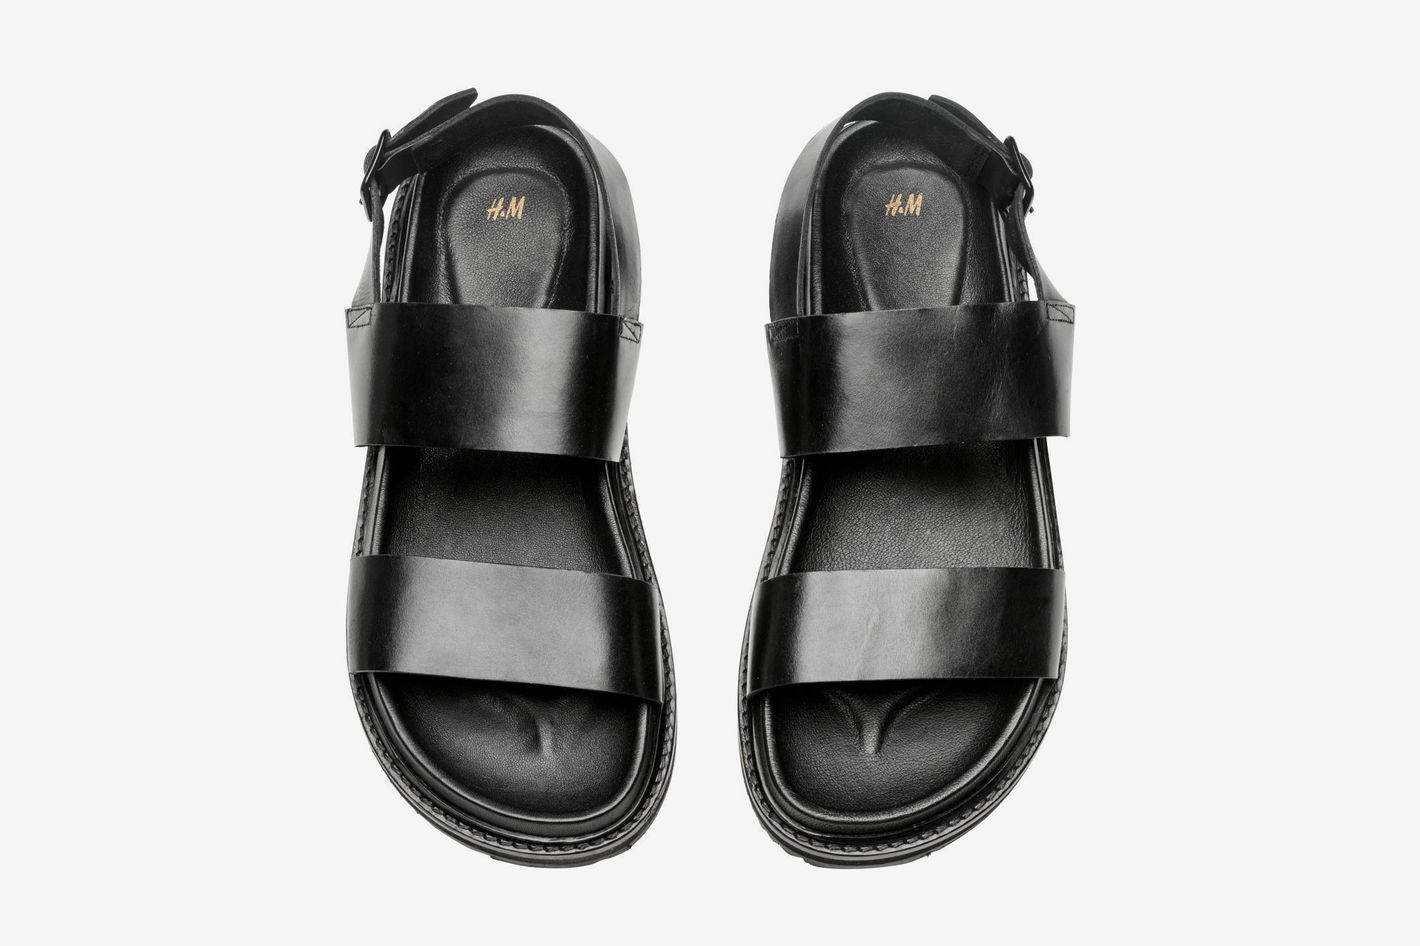 29 Stylish Men’s Sandals to Wear This Summer